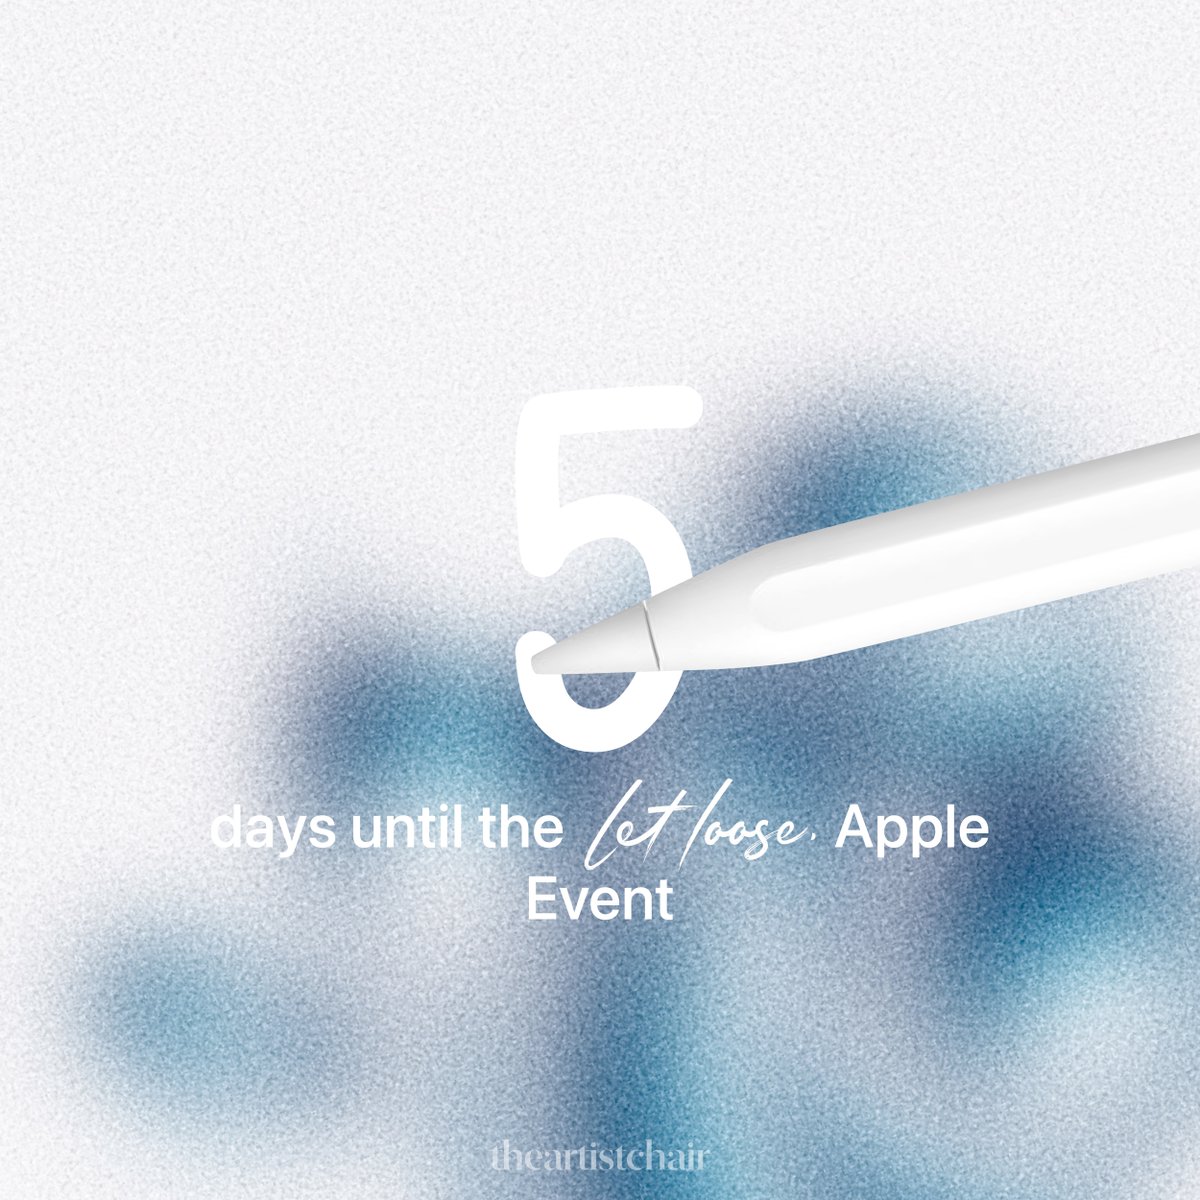 5 days until the #AppleEvent